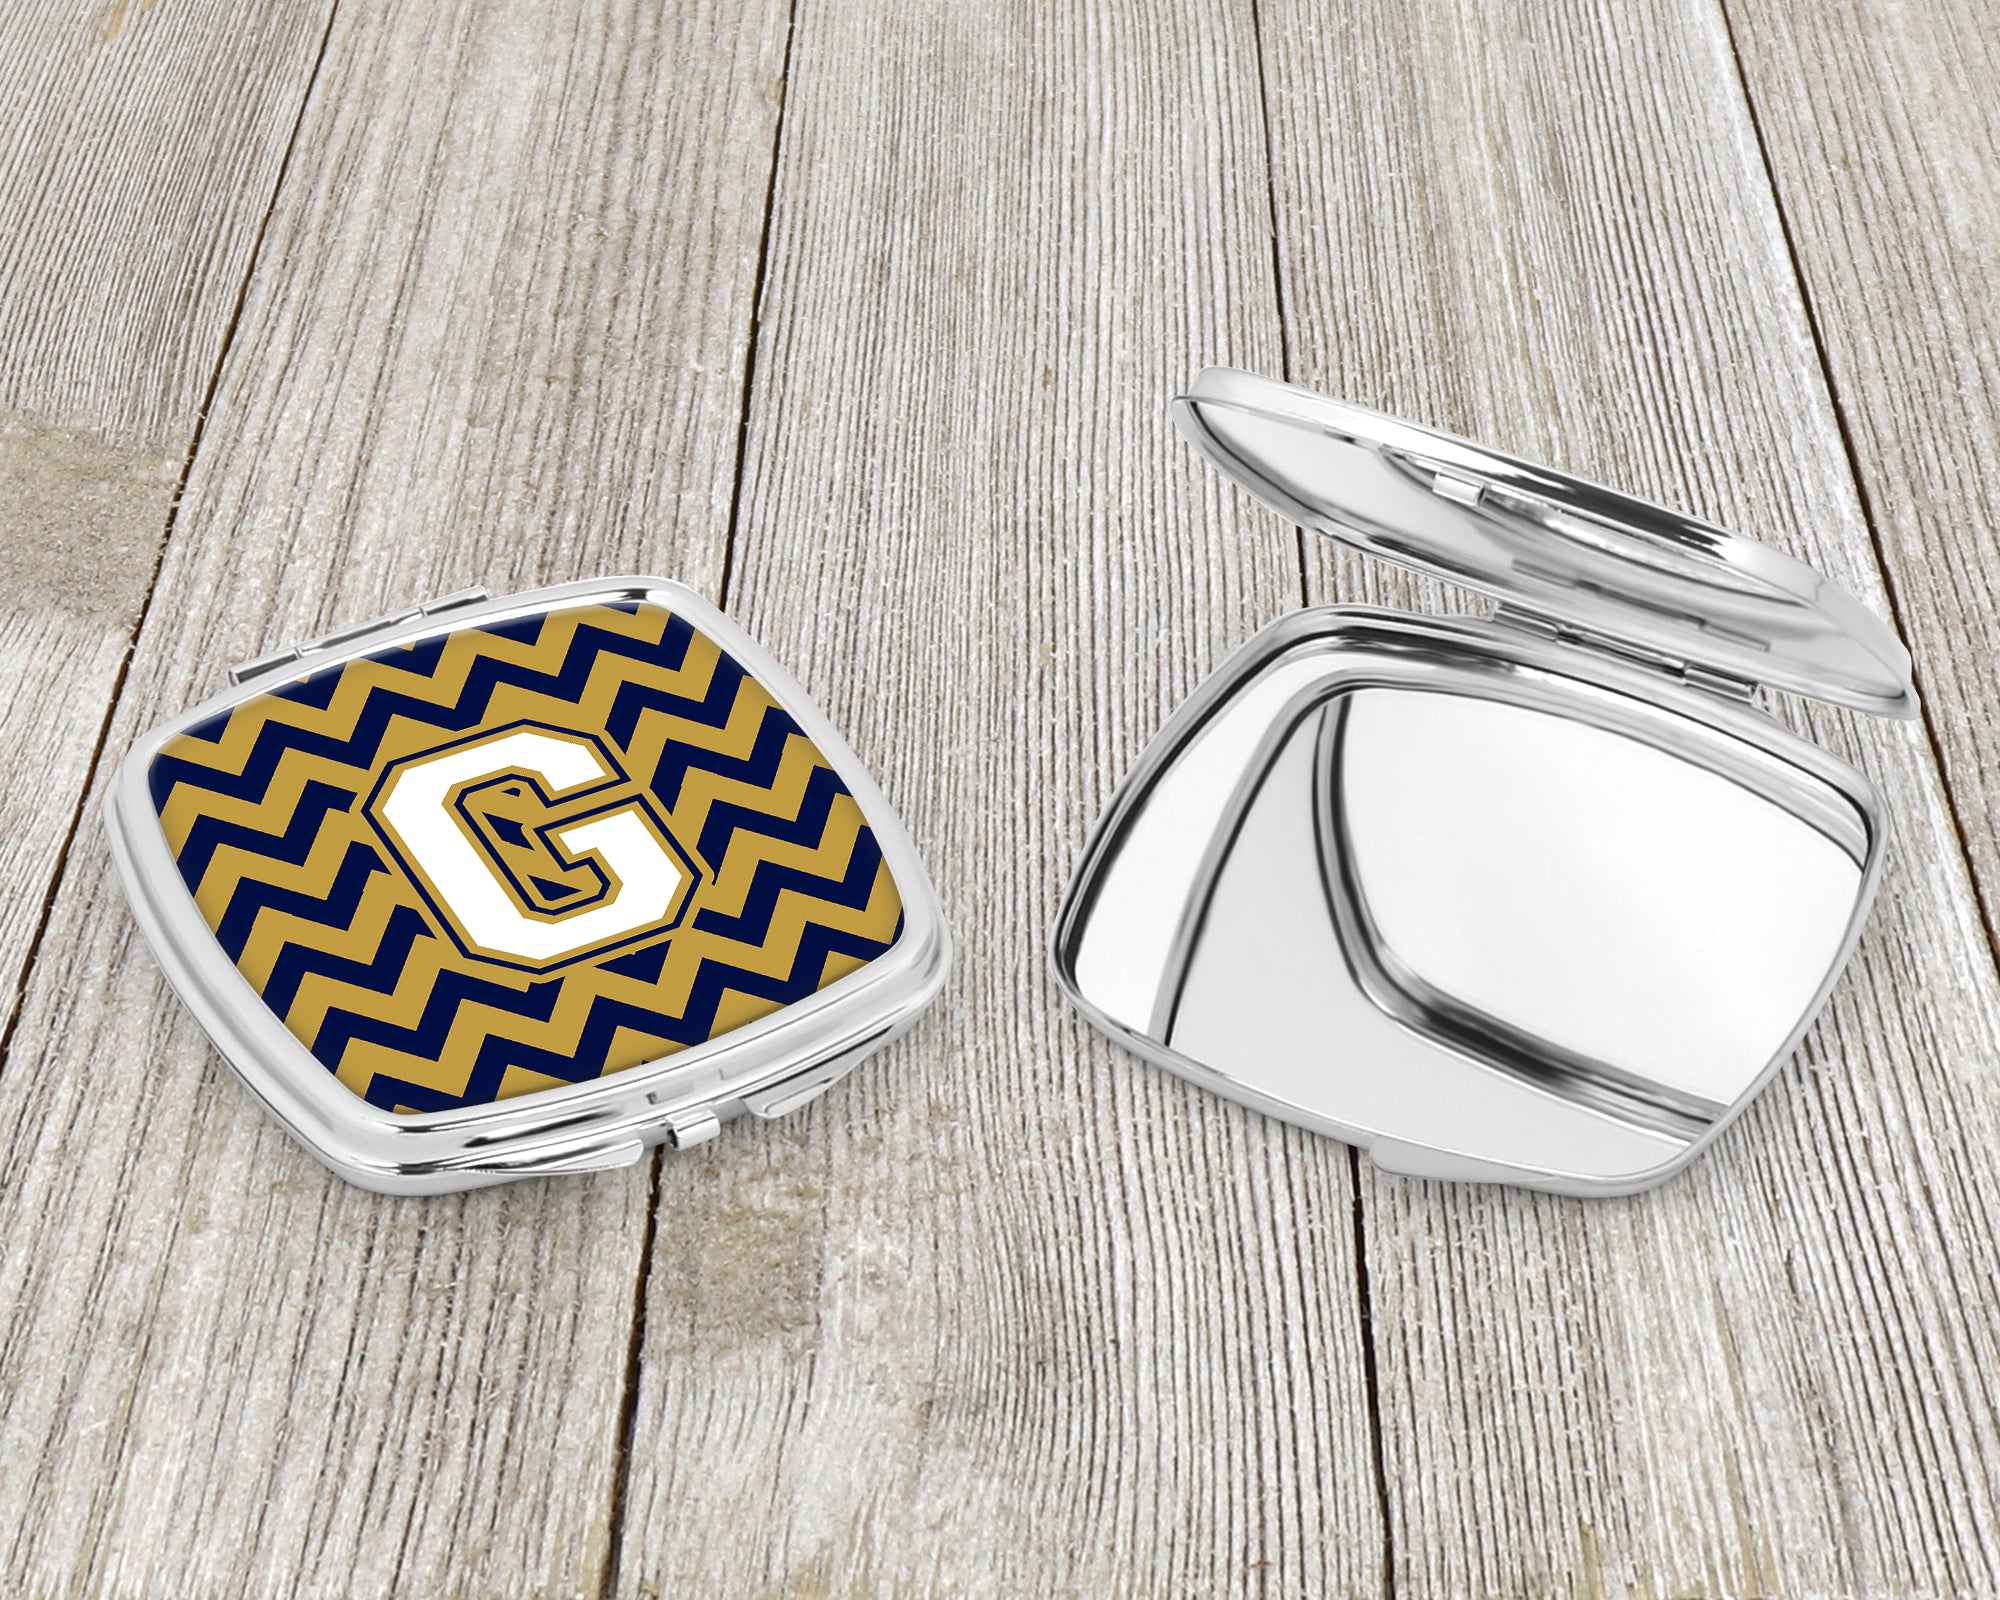 Letter G Chevron Navy Blue and Gold Compact Mirror CJ1057-GSCM